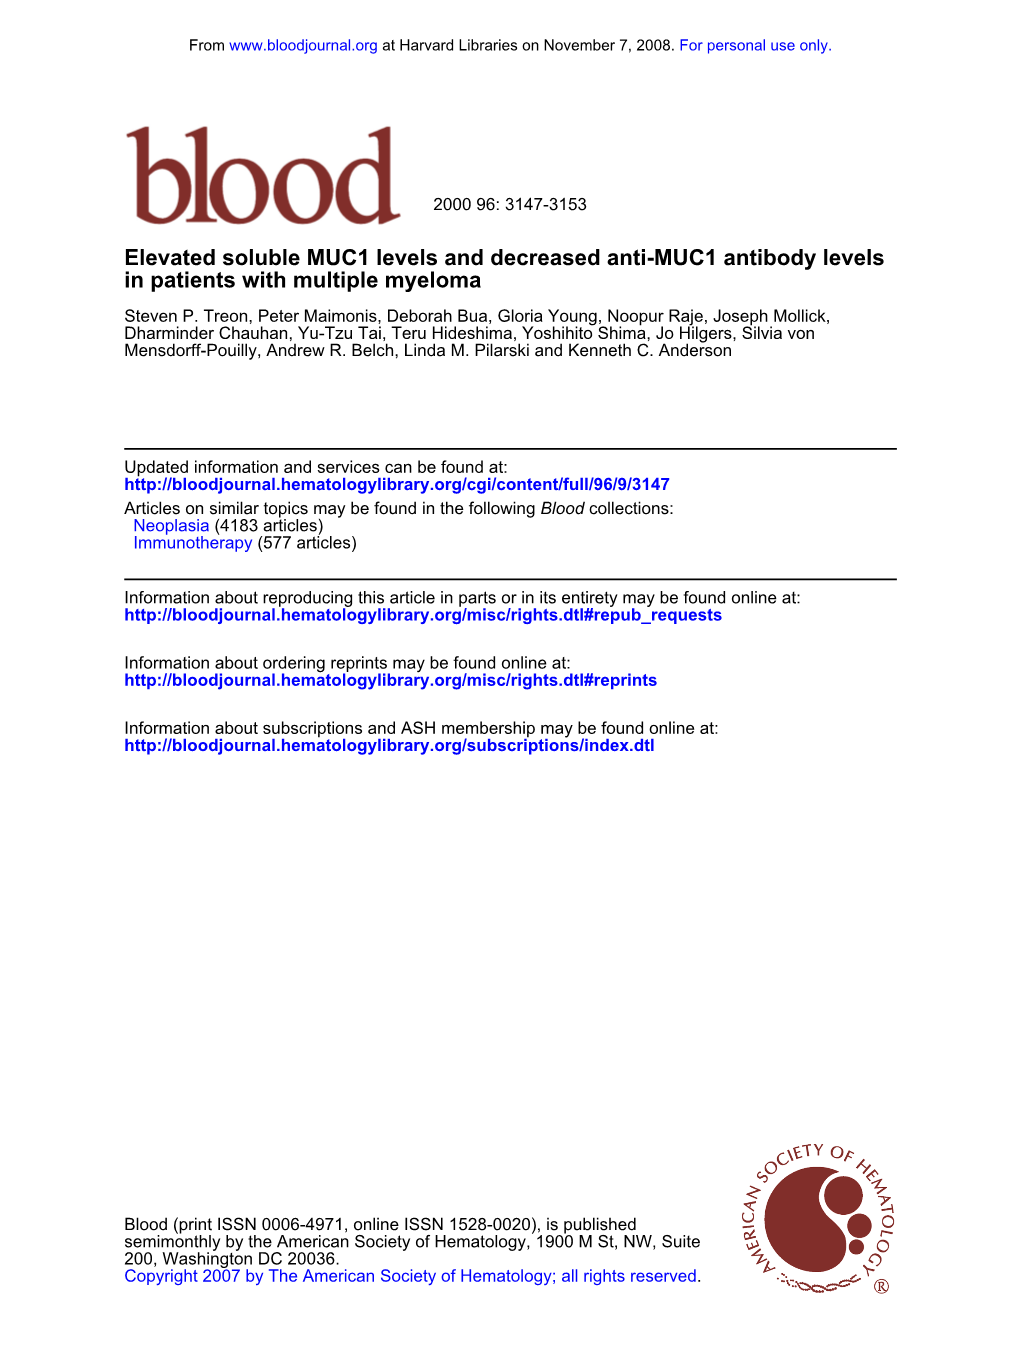 In Patients with Multiple Myeloma Elevated Soluble MUC1 Levels And